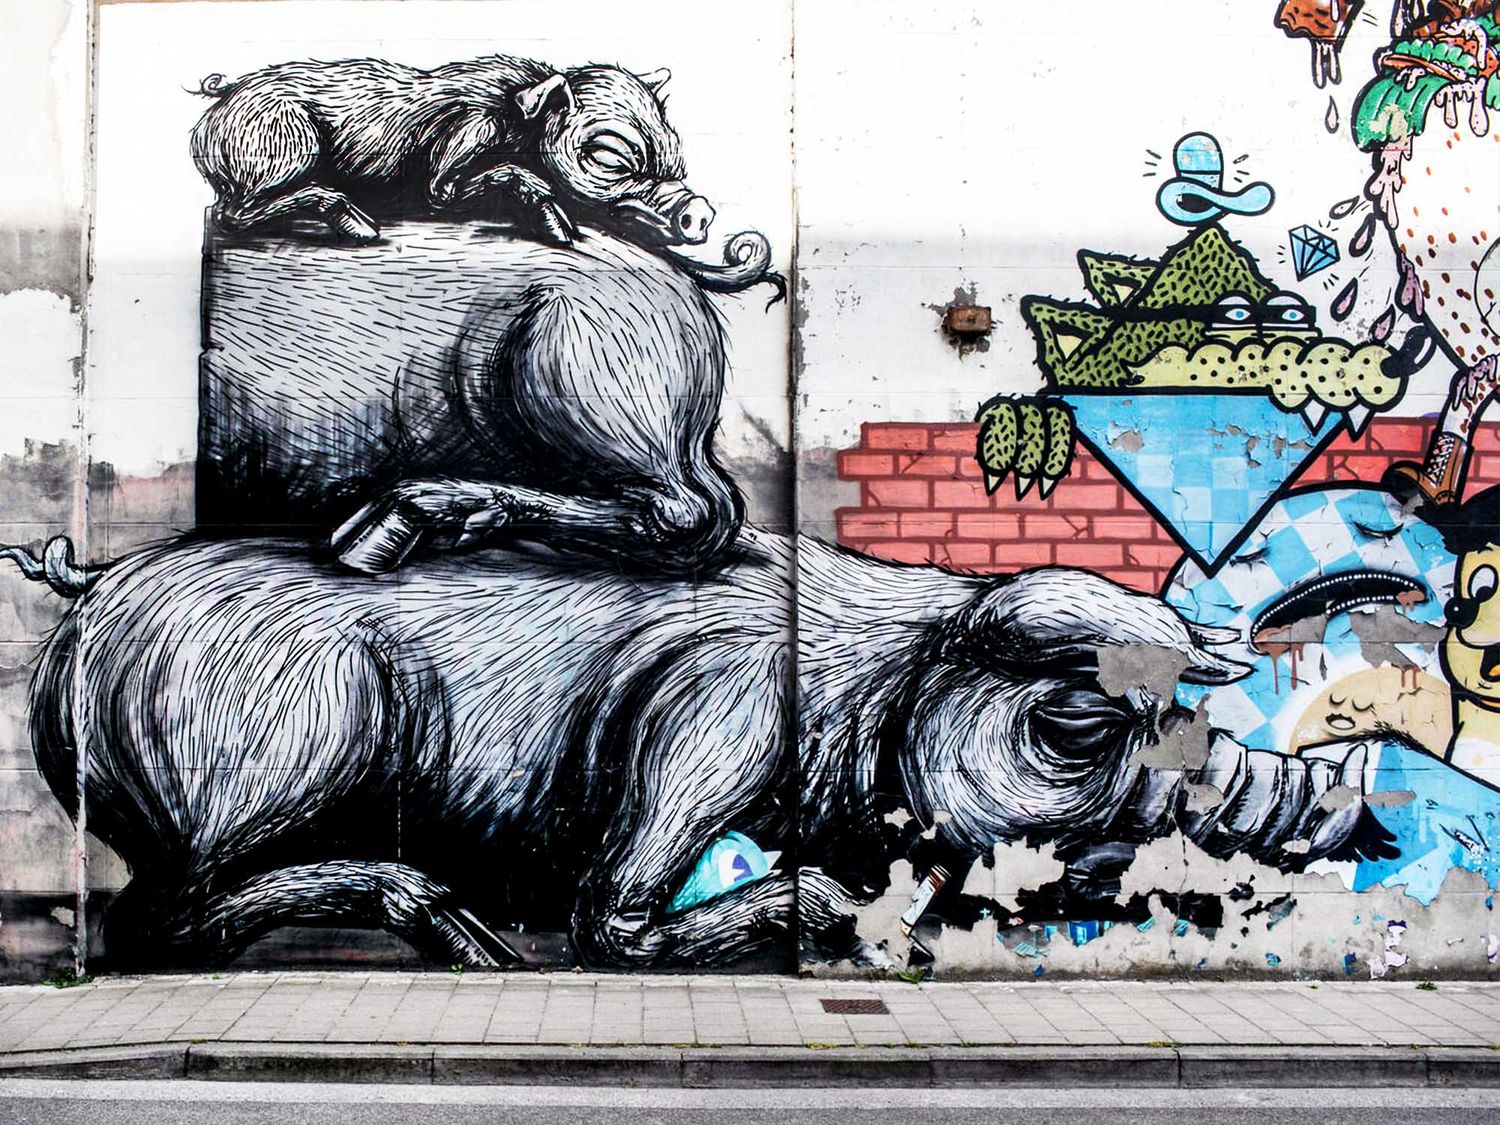 Roa's distinctive style does not leave anyone indifferent and it is almost impossible to visit Ghent without ending up in front of one of his murals. (©Stad Gent/Dienst Toerisme).